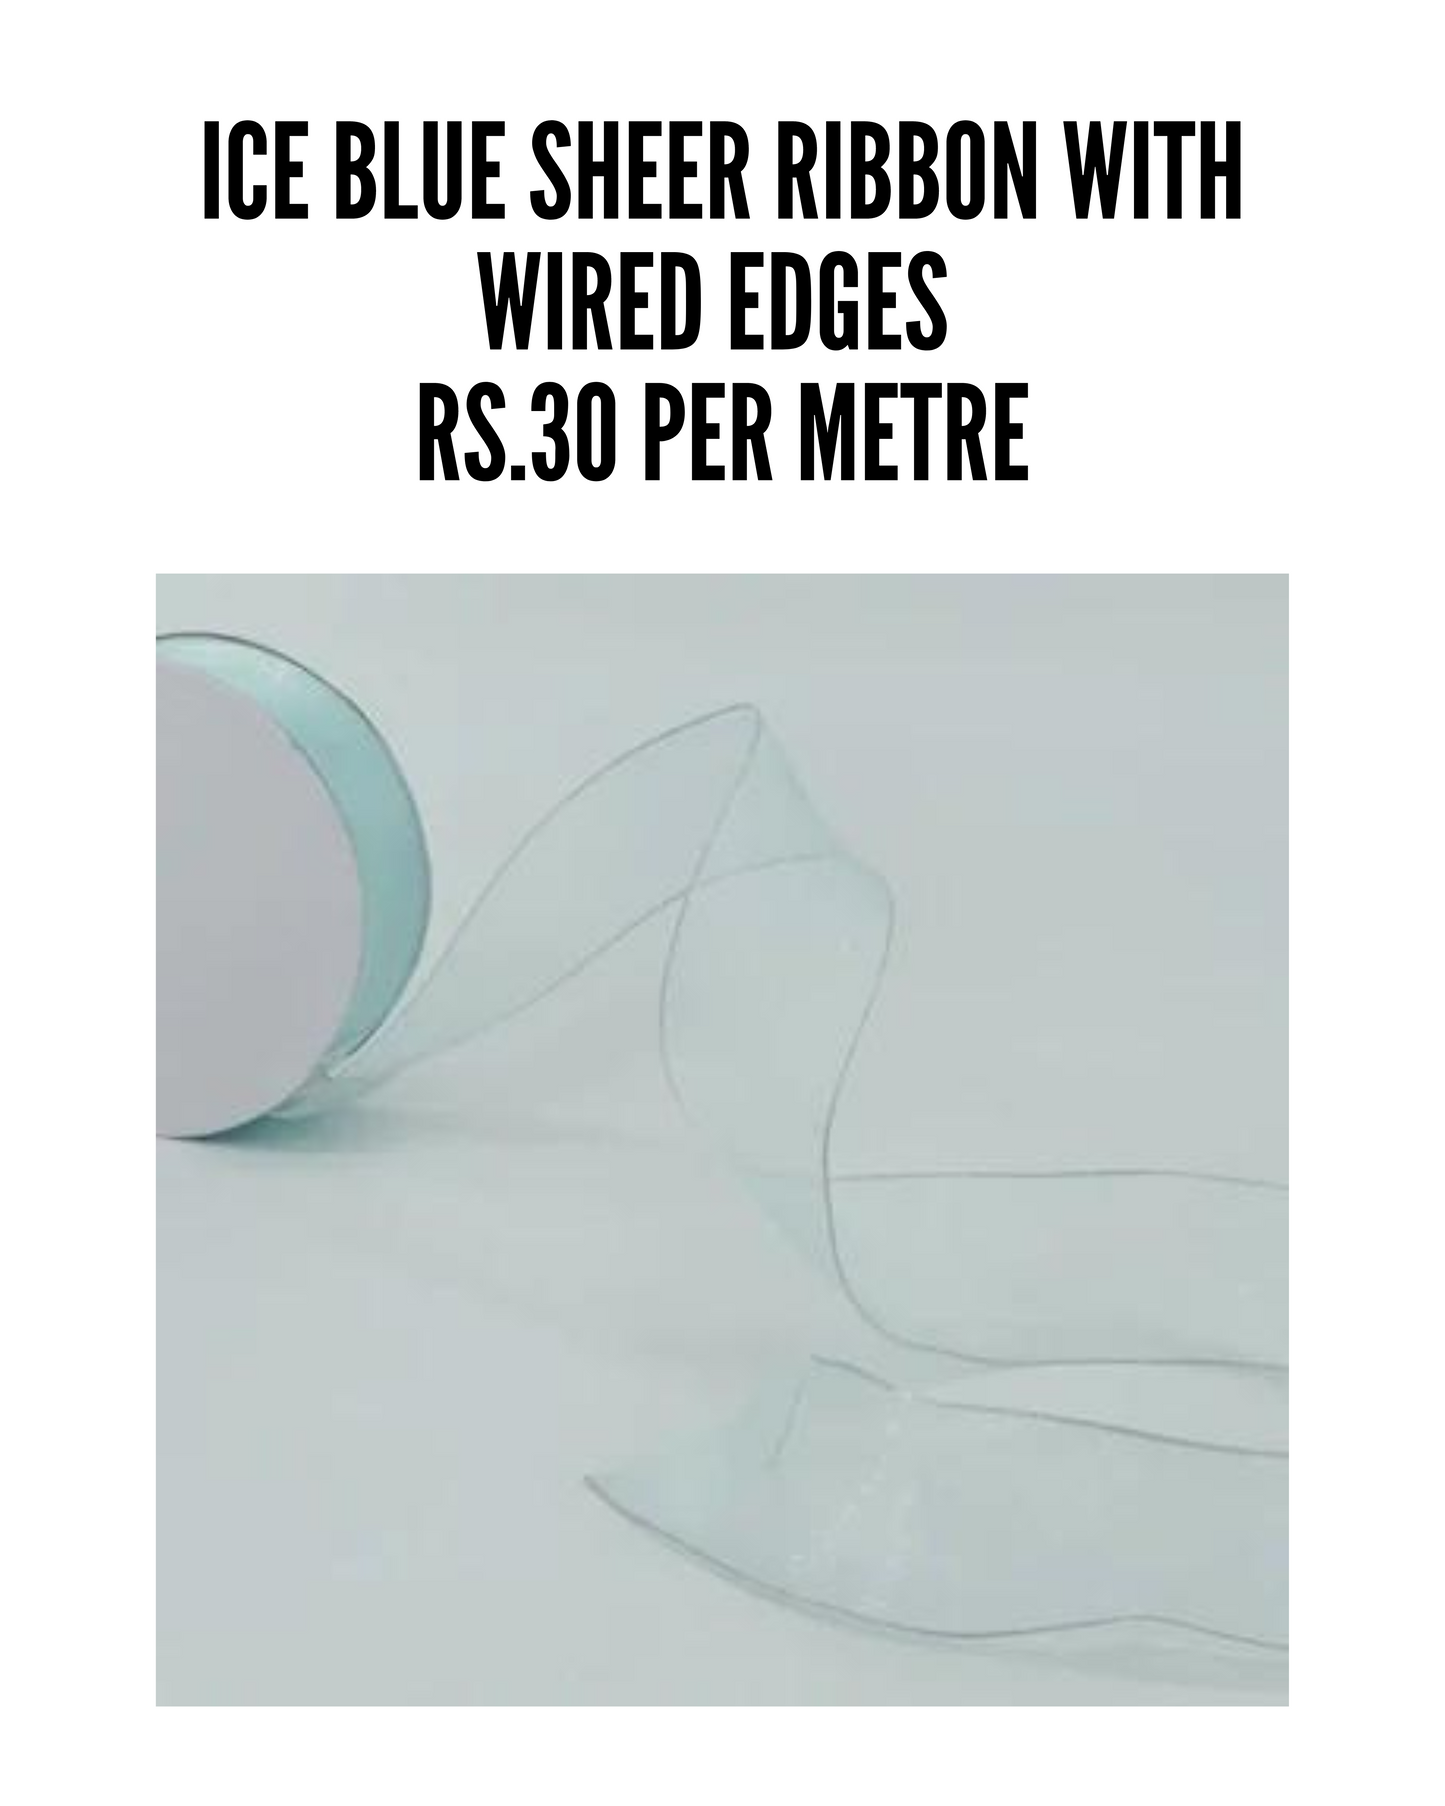 Ice Blue Sheer Ribbon with Wired Edges - 5 metre